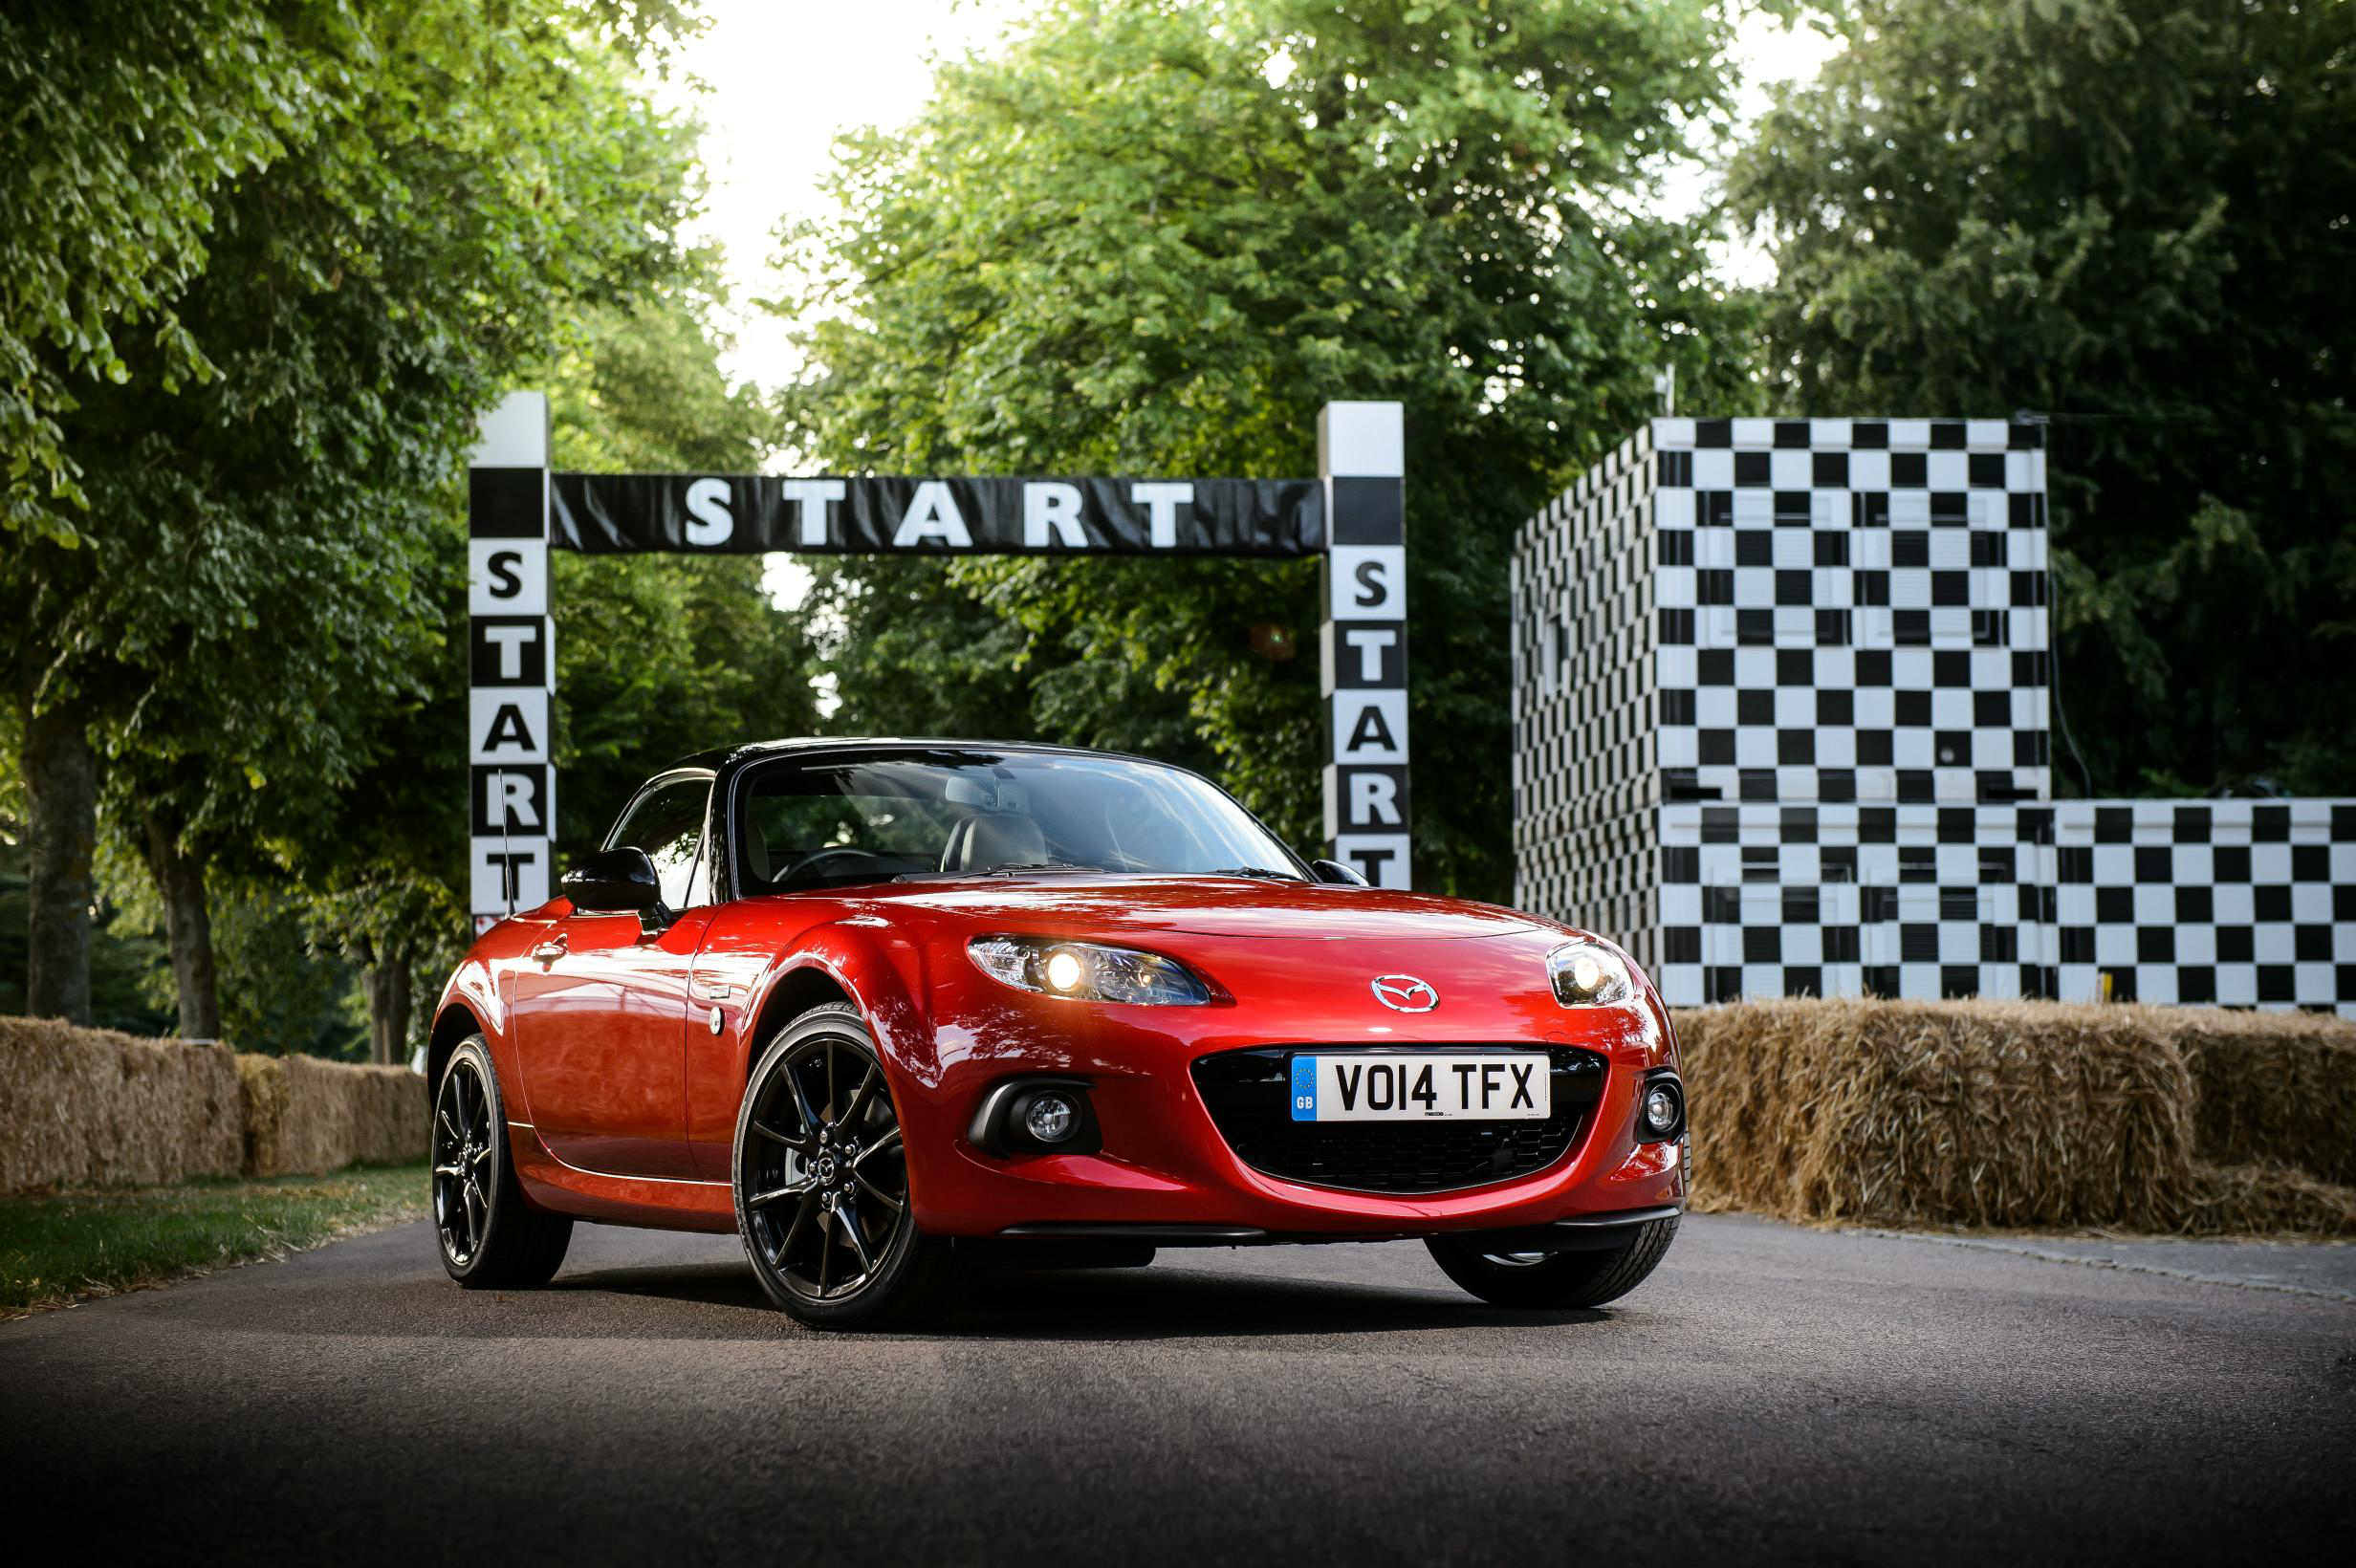 image of a red mazda mx 5 car exterior